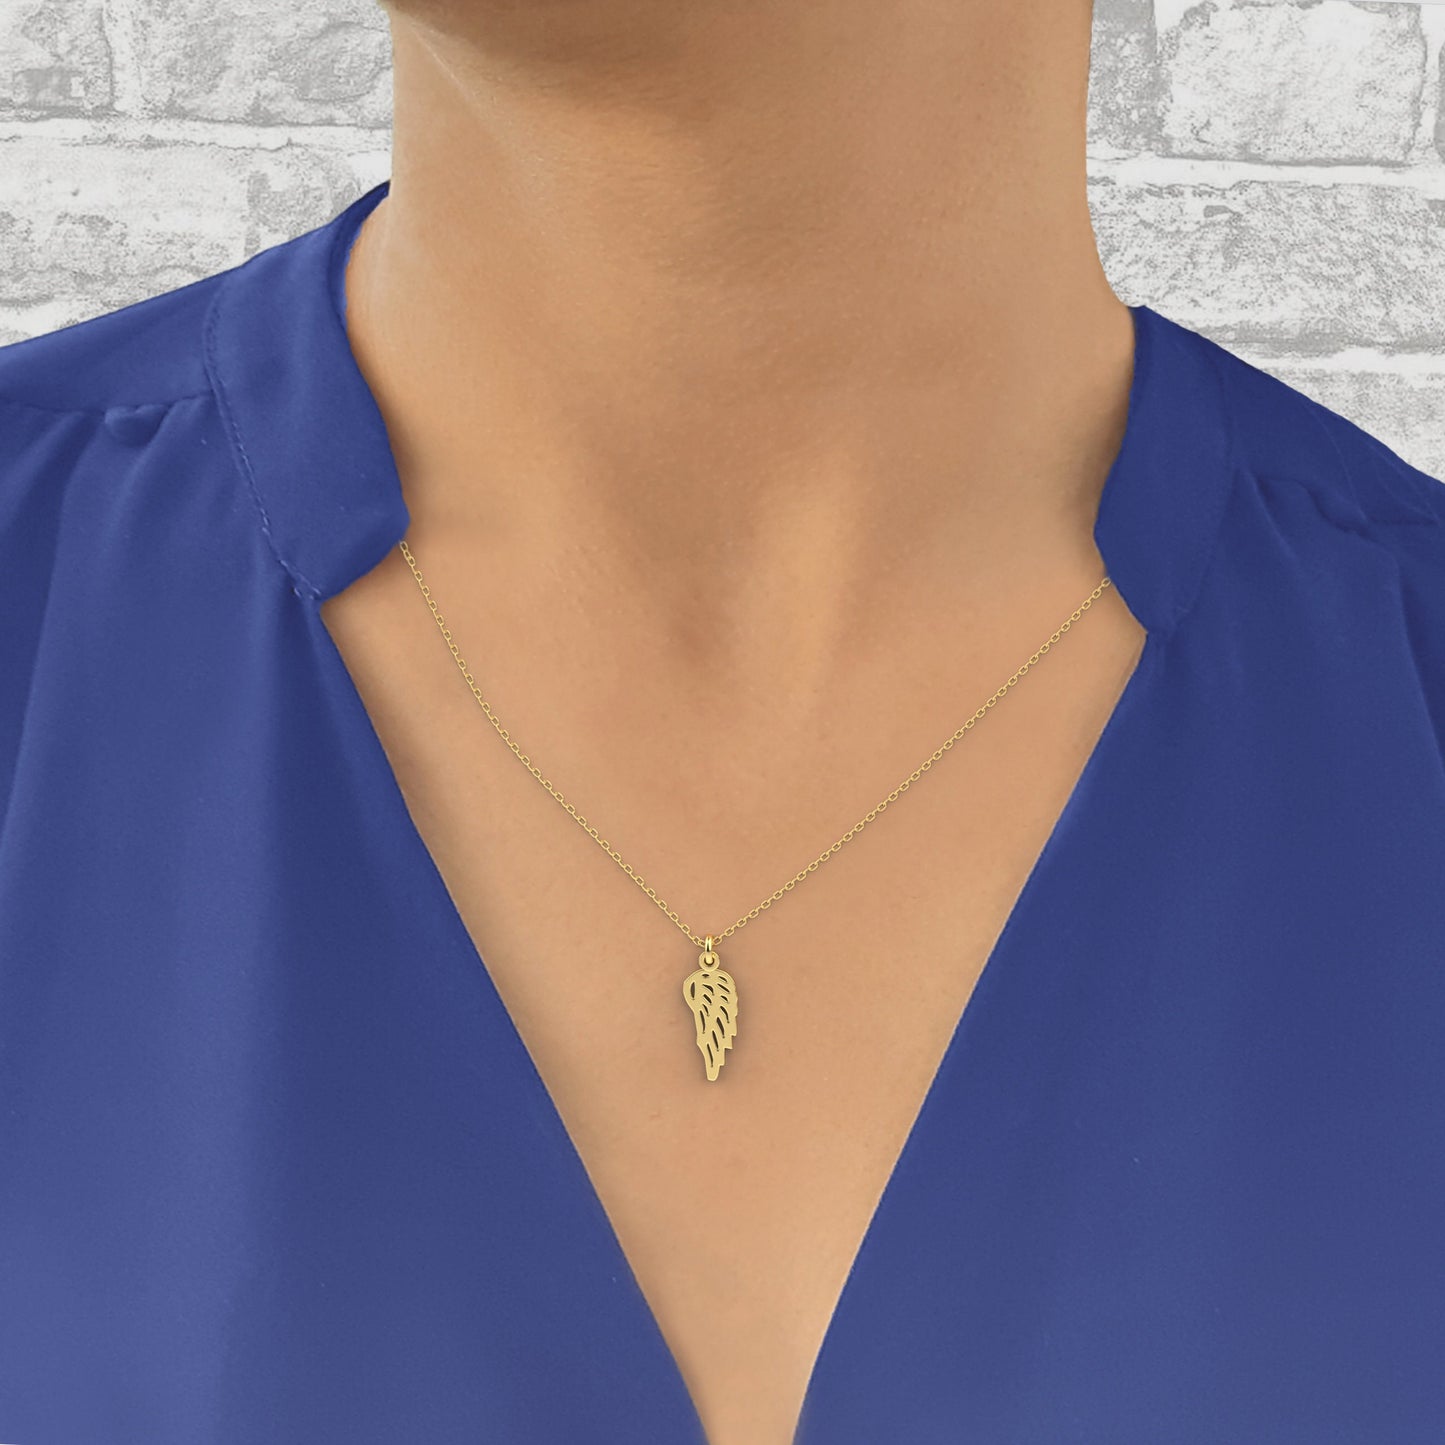 14K Yellow Gold half wing necklace, 14k solid gold necklace, Dainty wing necklace, Solid gold chain , angel wing charm necklace gift for her